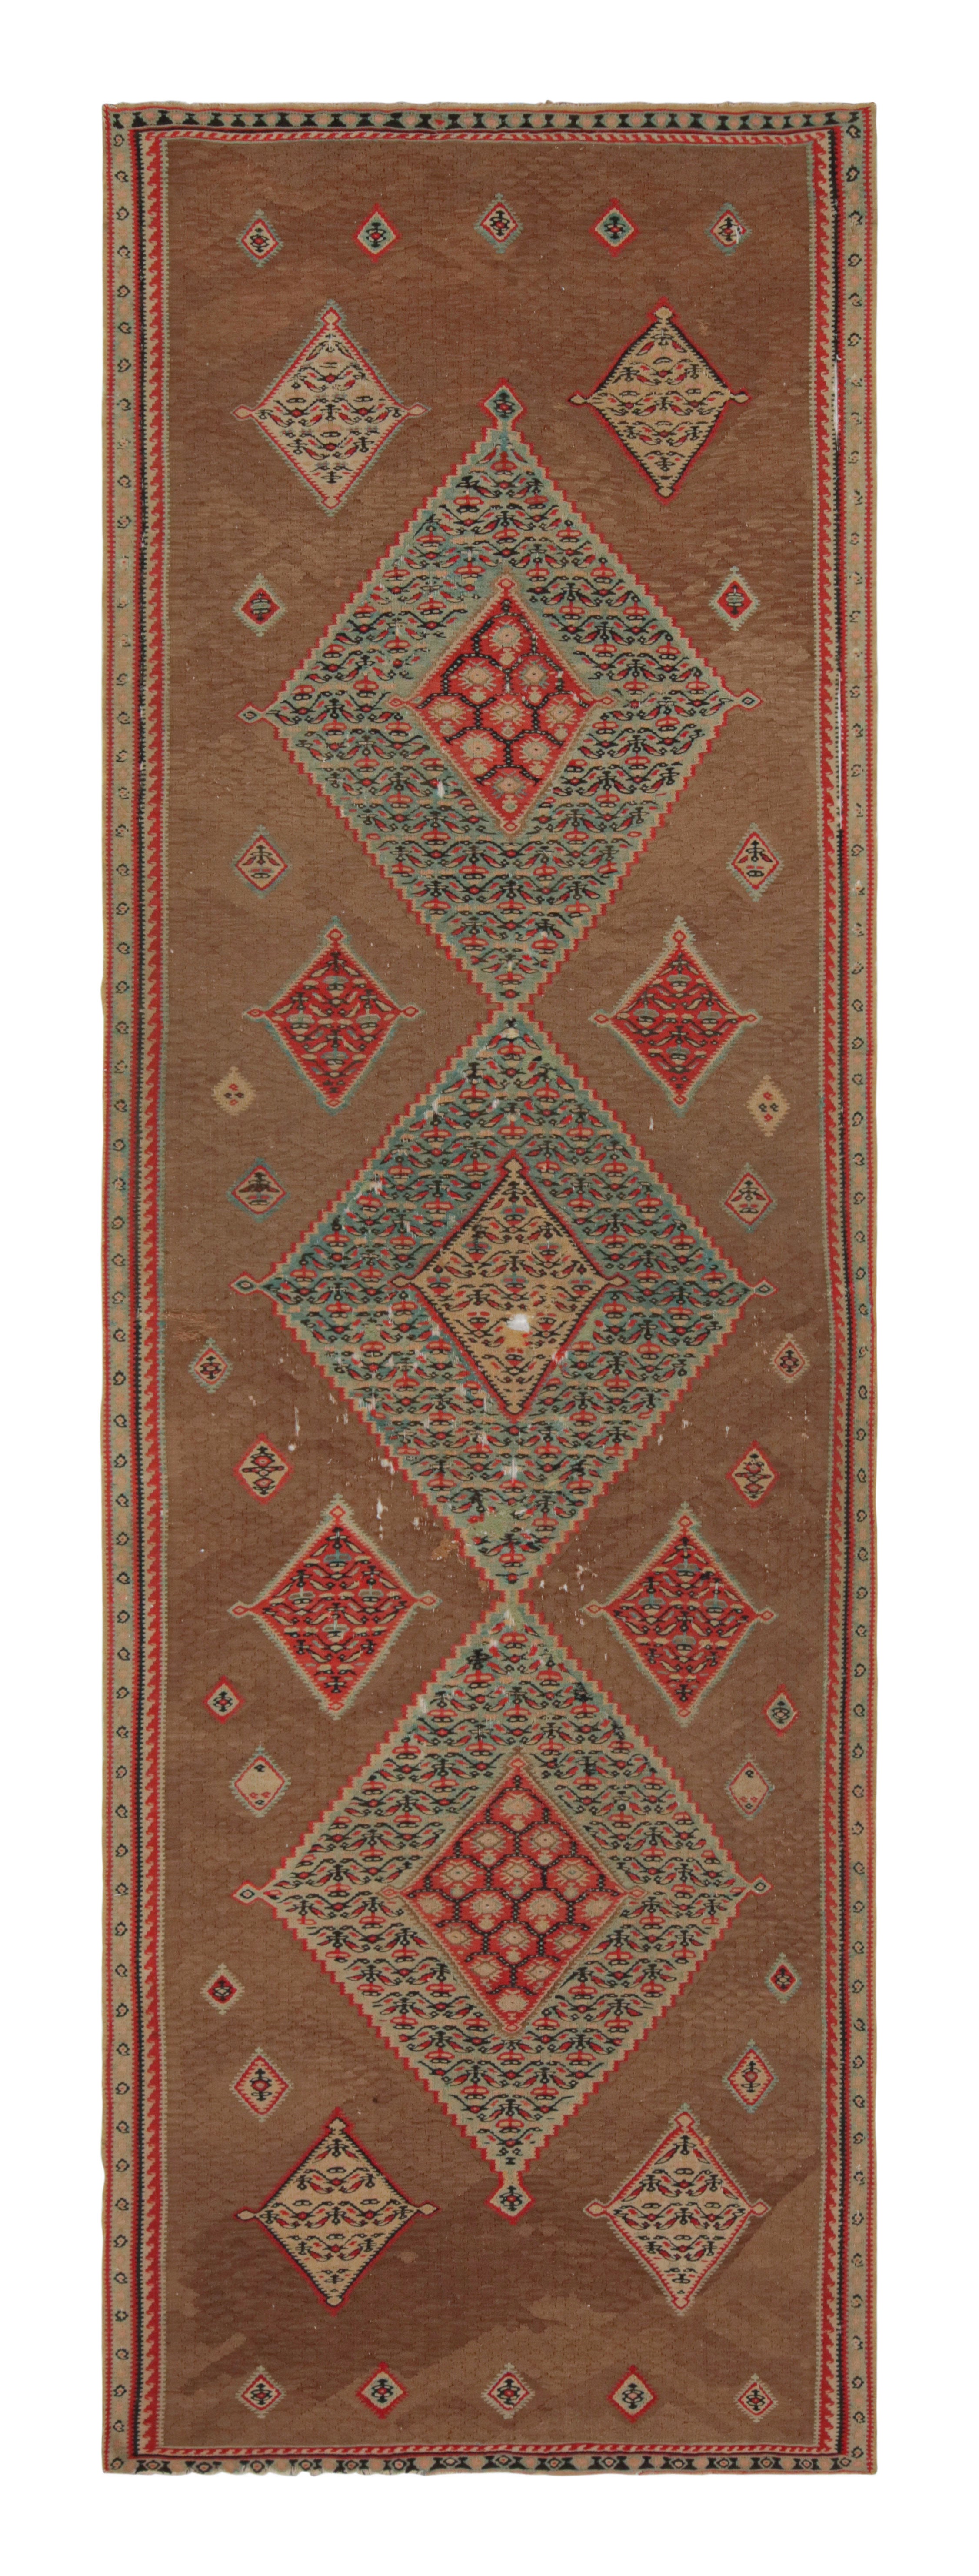 Antique Geometric Beige and Red Wool Persian Kilim-Senneh Runner by Rug & Kilim For Sale